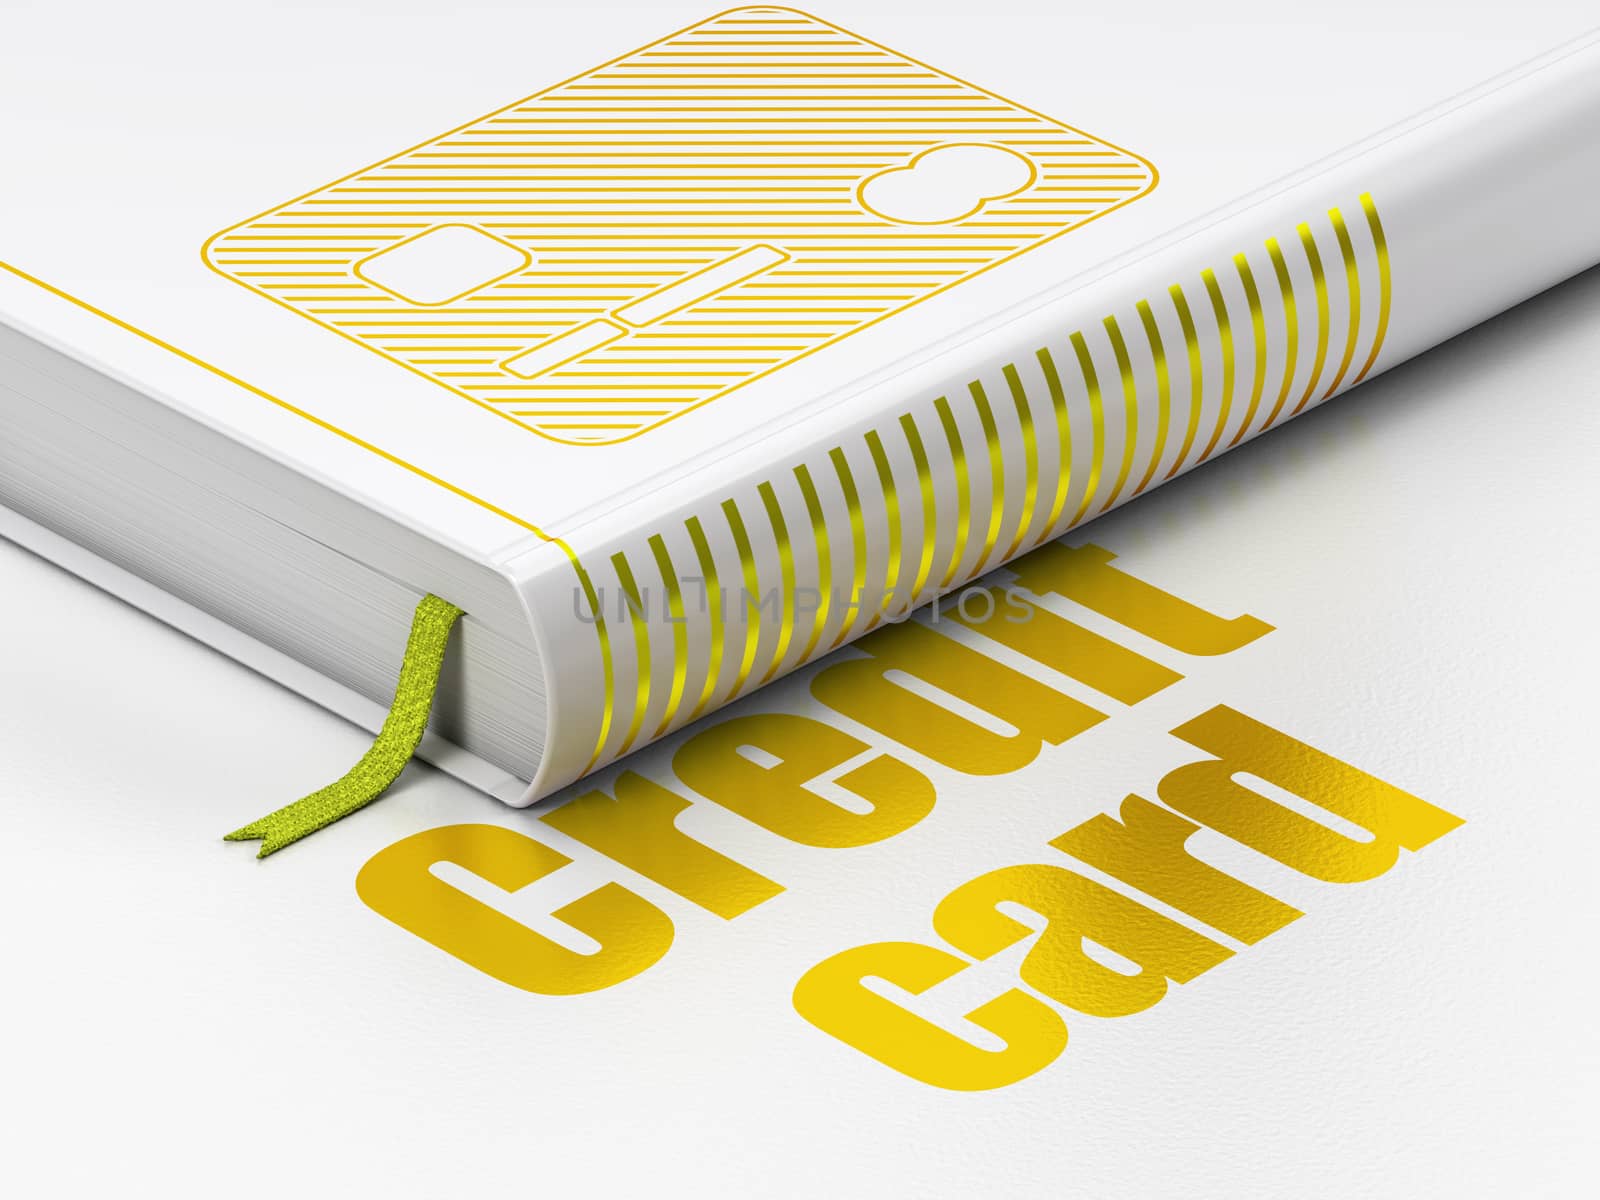 Money concept: closed book with Gold Credit Card icon and text Credit Card on floor, white background, 3D rendering